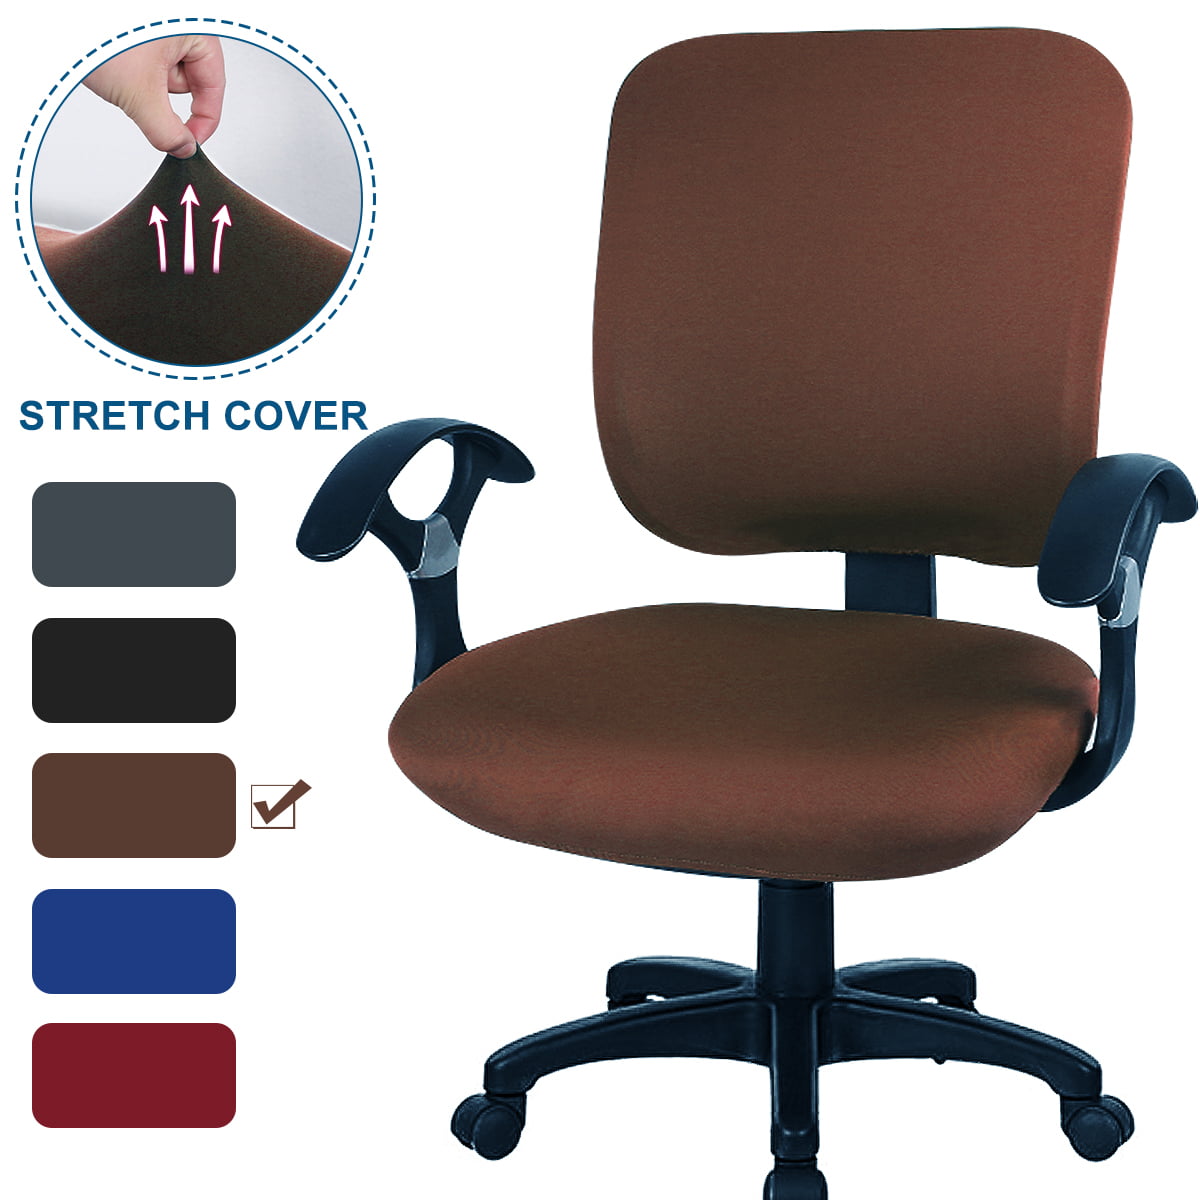 smiry Stretch Jacquard Office Computer Chair Seat Covers, Removable  Washable Anti-dust Desk Chair Seat Cushion Protectors - Black